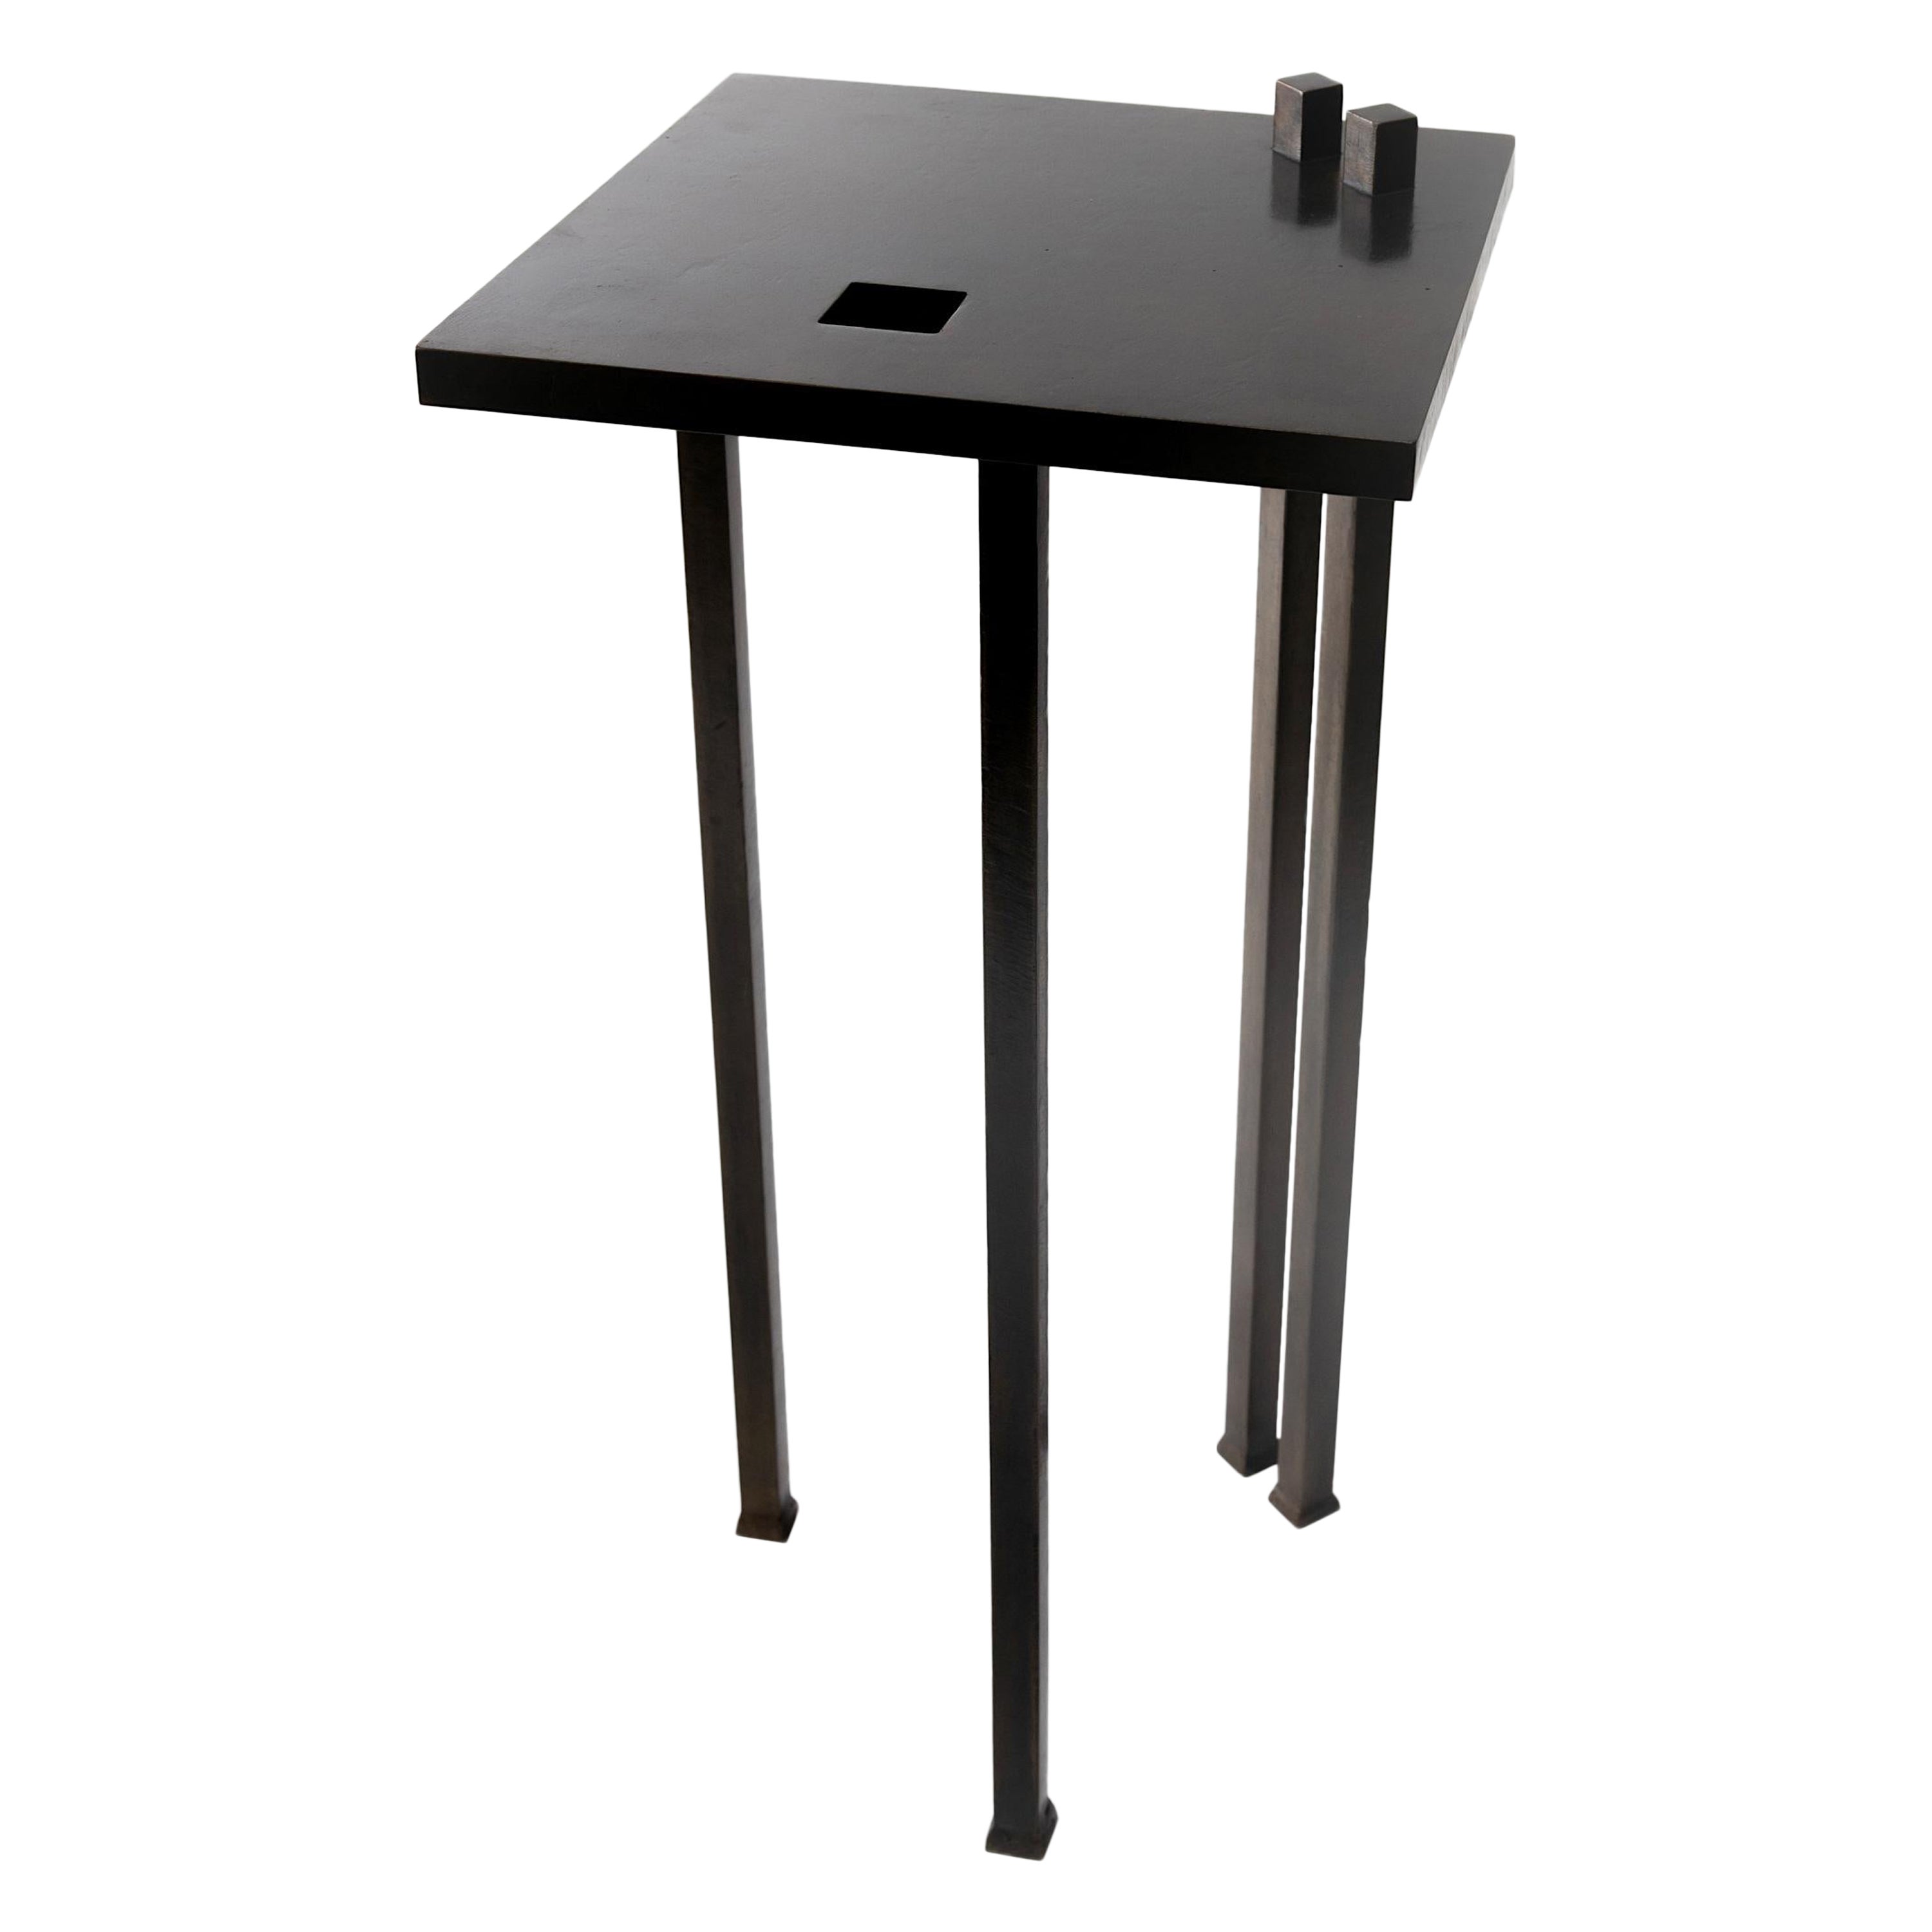 Bronzed Modern/Contemporary Steel Side Table Linear Cutout Protrusion Geometric For Sale